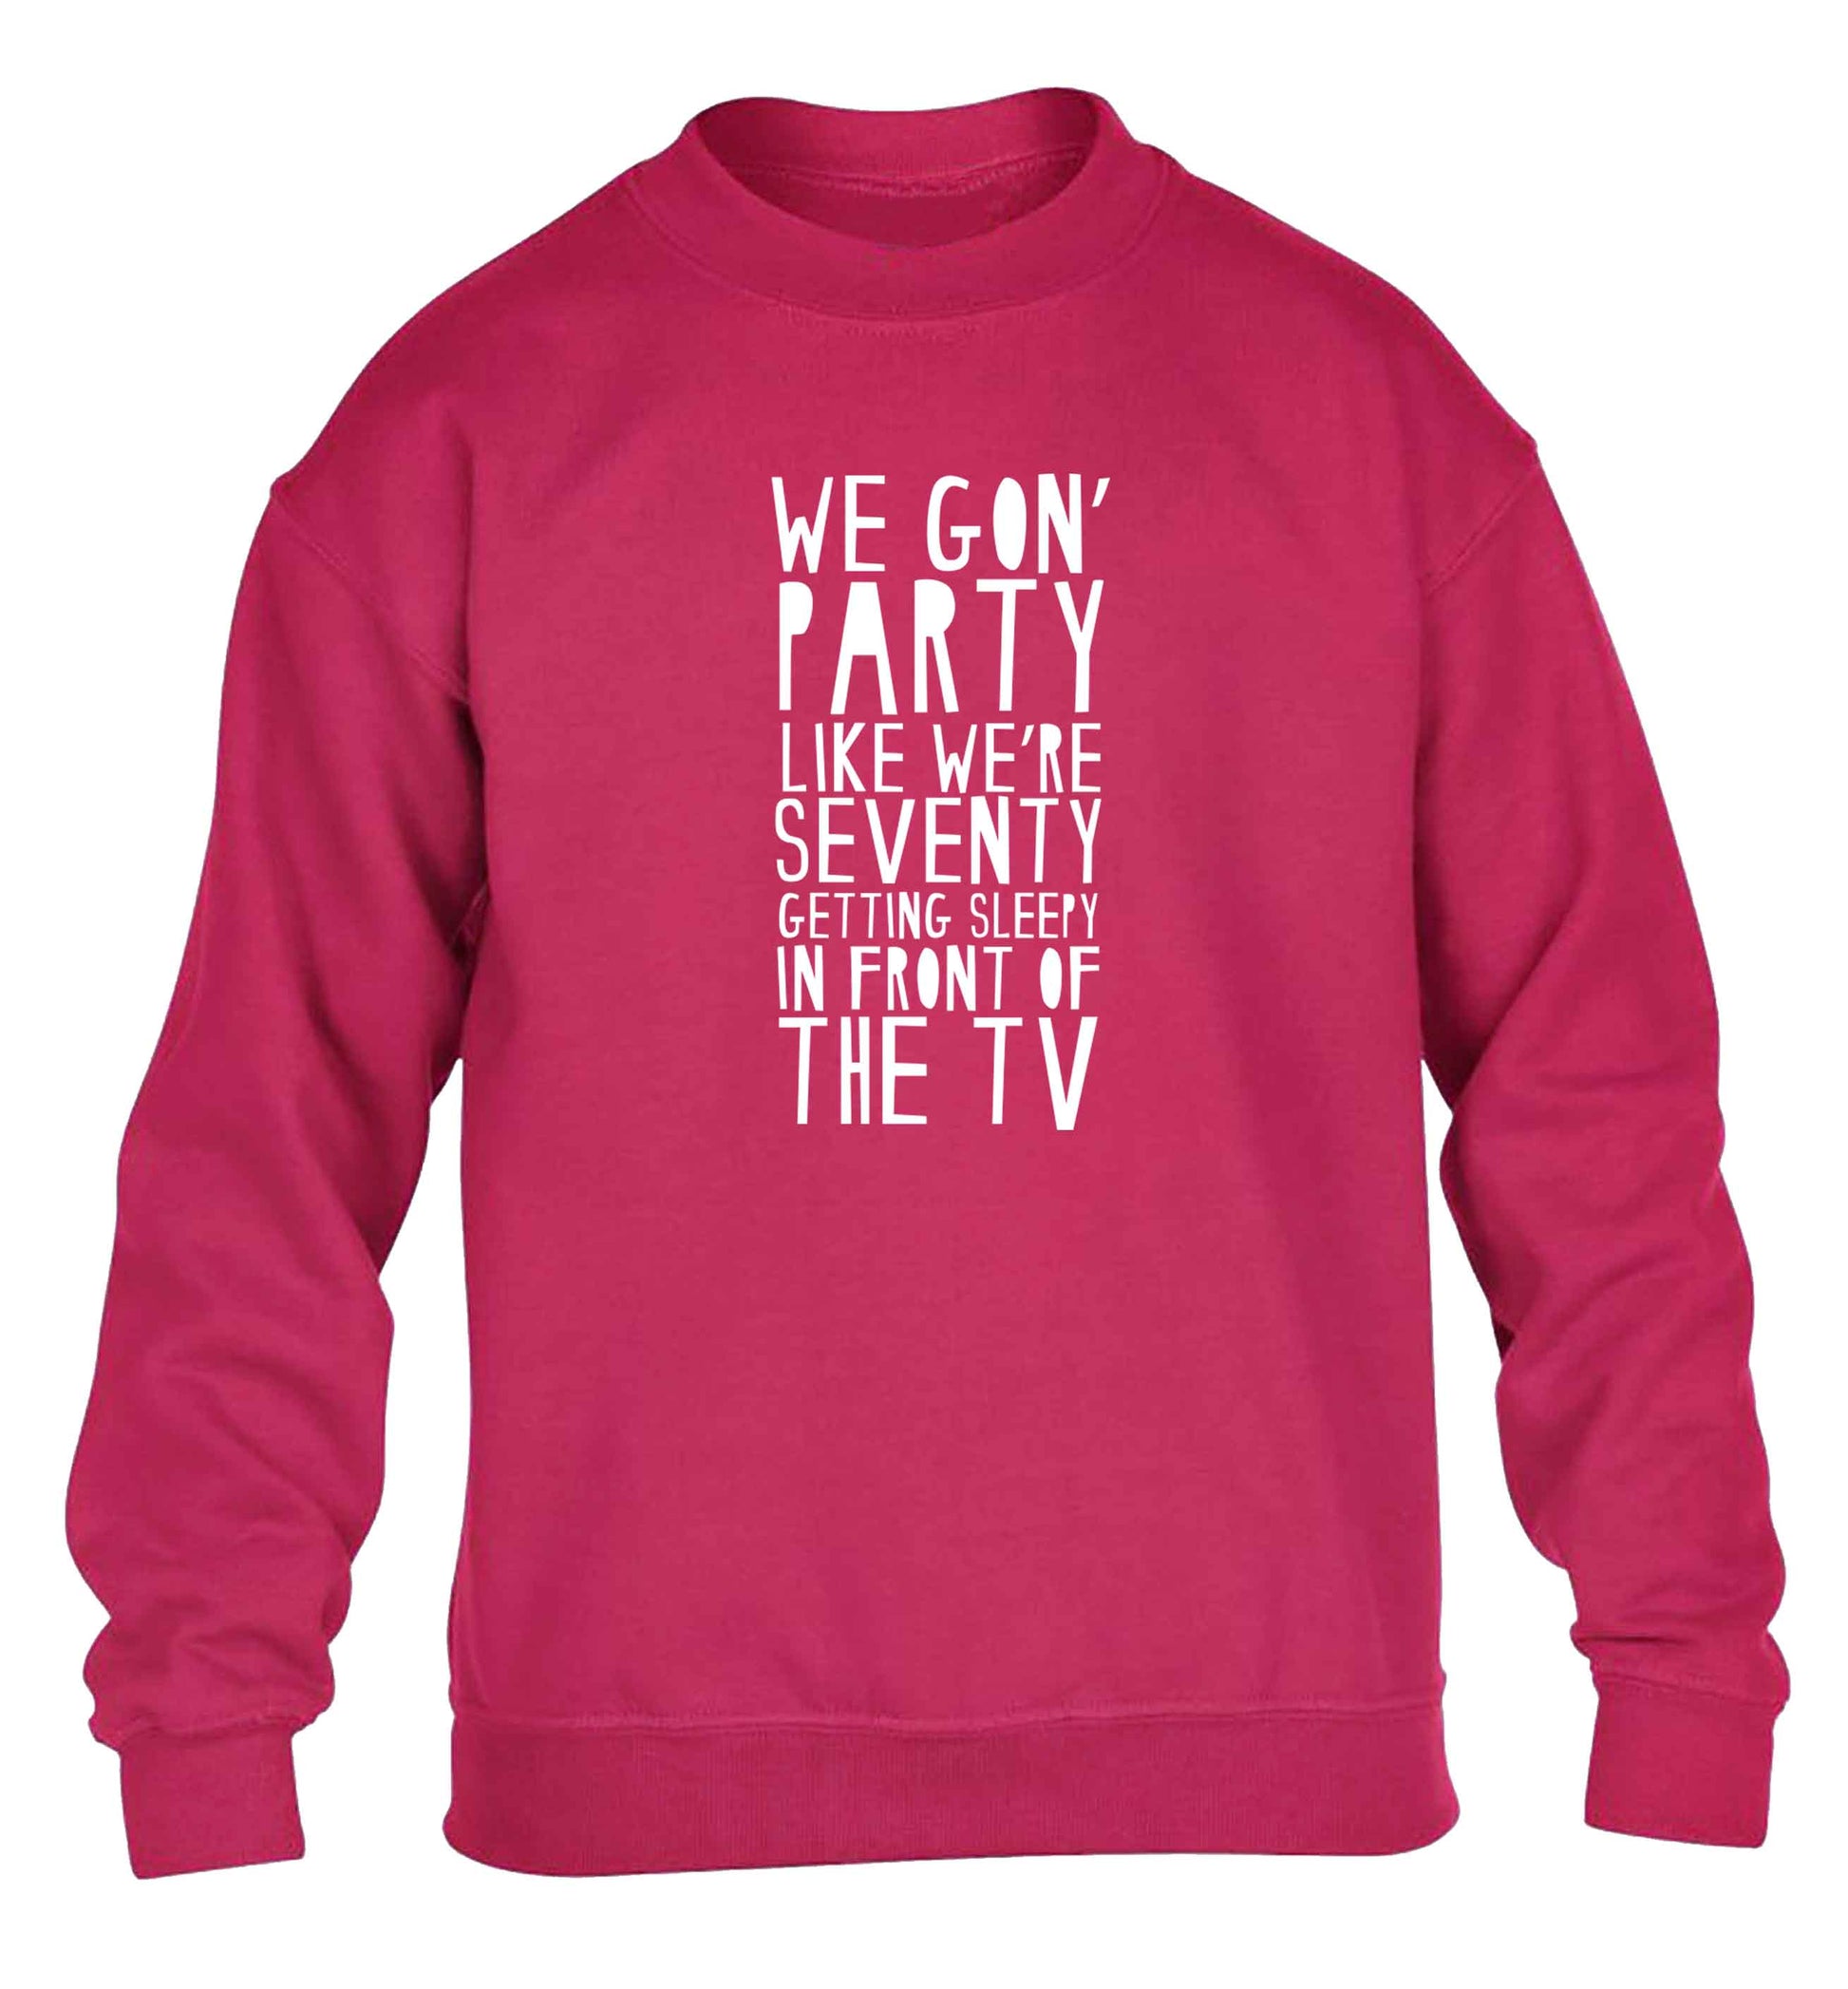 We gon' party like we're seventy getting sleepy in front of the TV children's pink sweater 12-13 Years